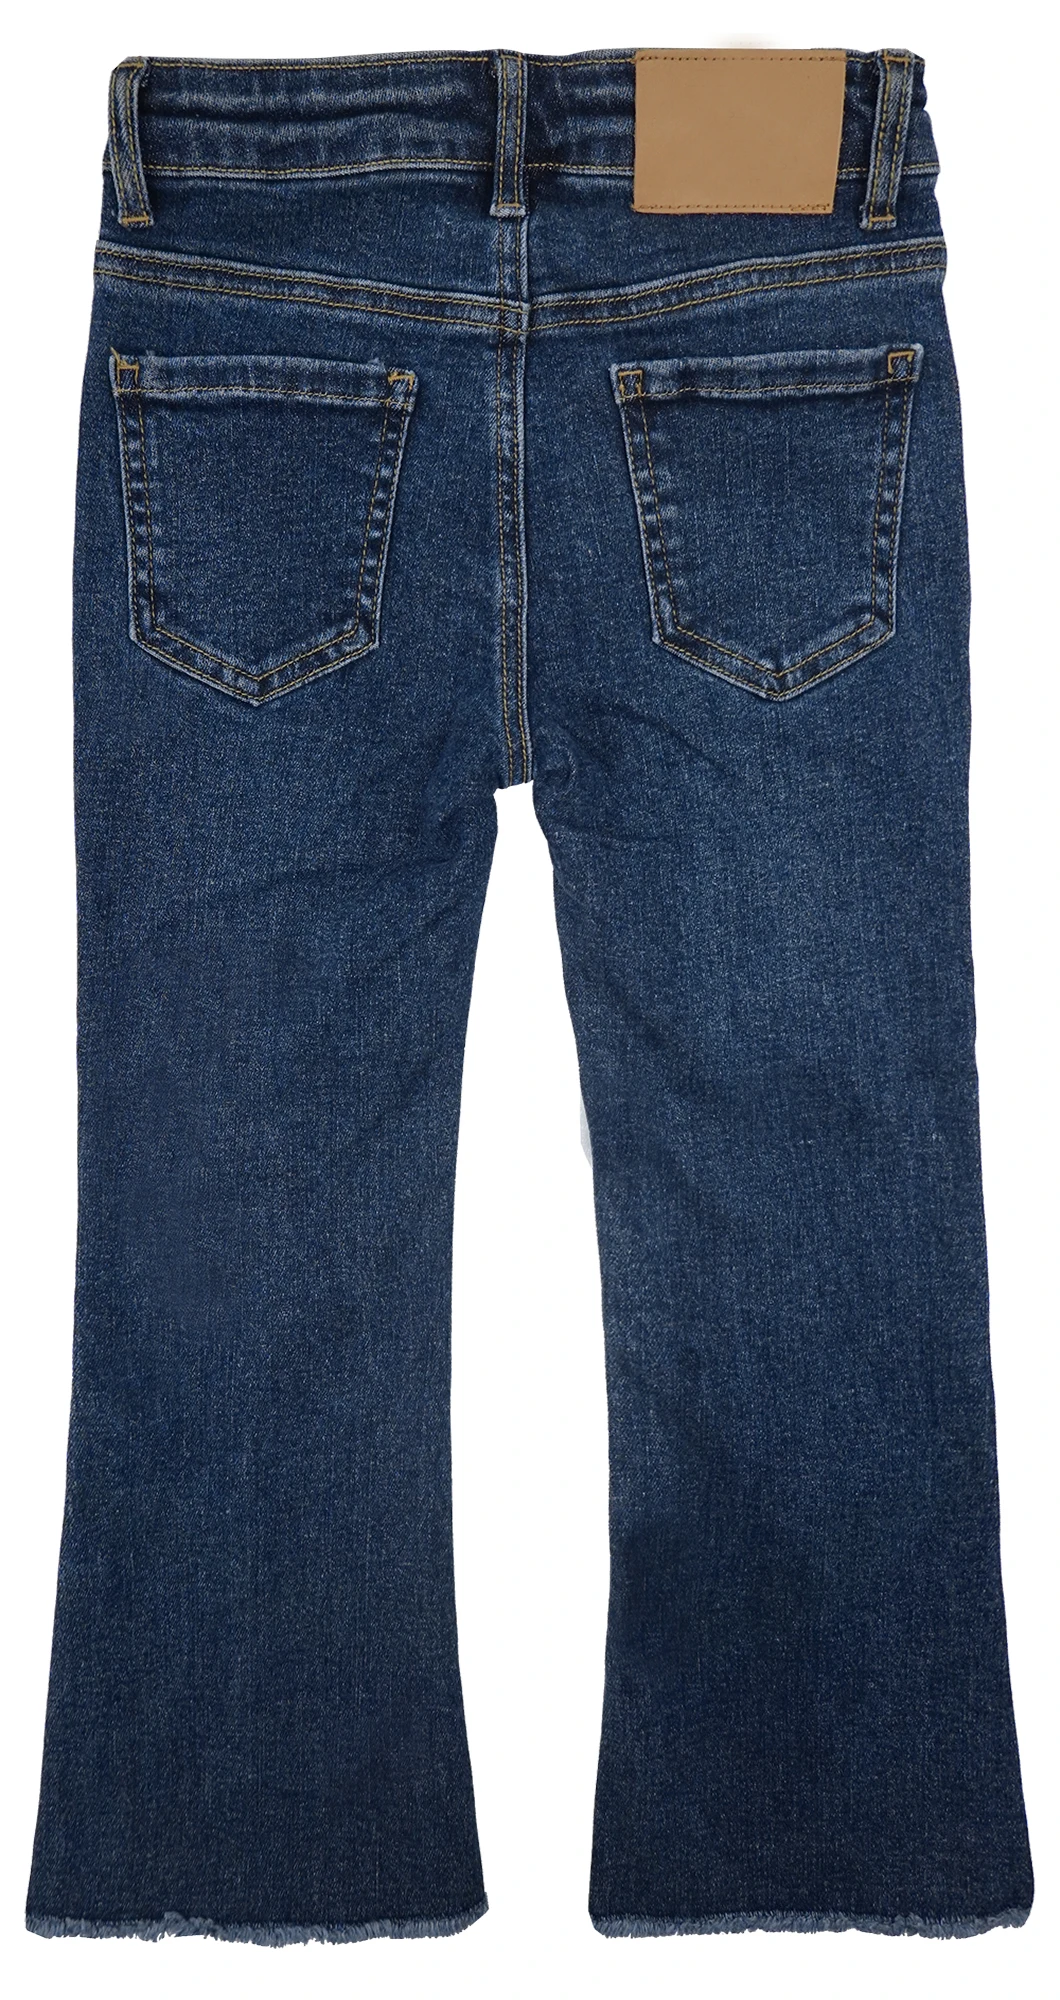 

KIDSCOOL SPACE Girls Jeans,Raw Edge 3 Buttons Stretchy Bell-bottom Denim Pants